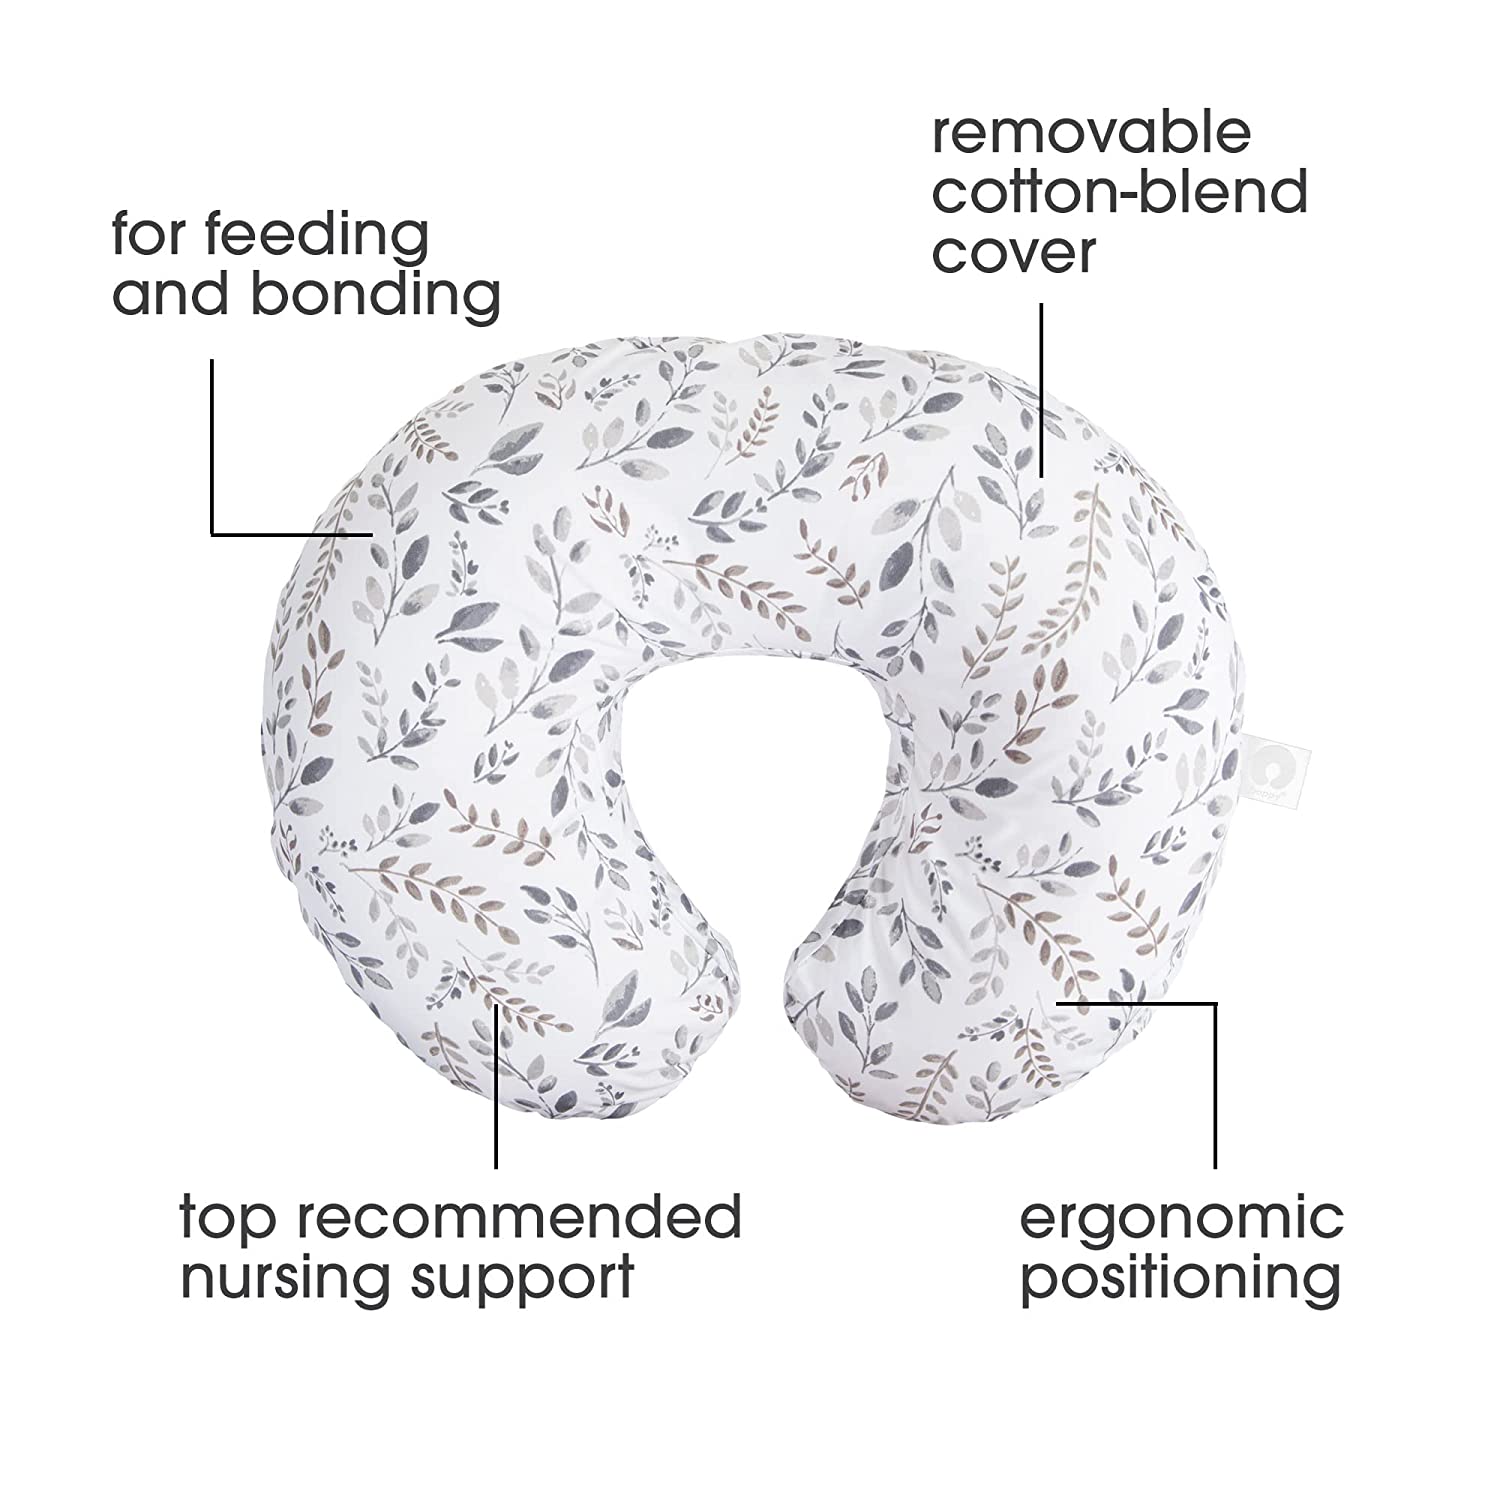 Boppy Nursing Pillow Original Support, Gray Taupe Leaves, Ergonomic Nursing Essentials for Bottle and Breastfeeding, Firm Fiber Fill, with Removable Nursing Pillow Cover, Machine Washable - image 2 of 7